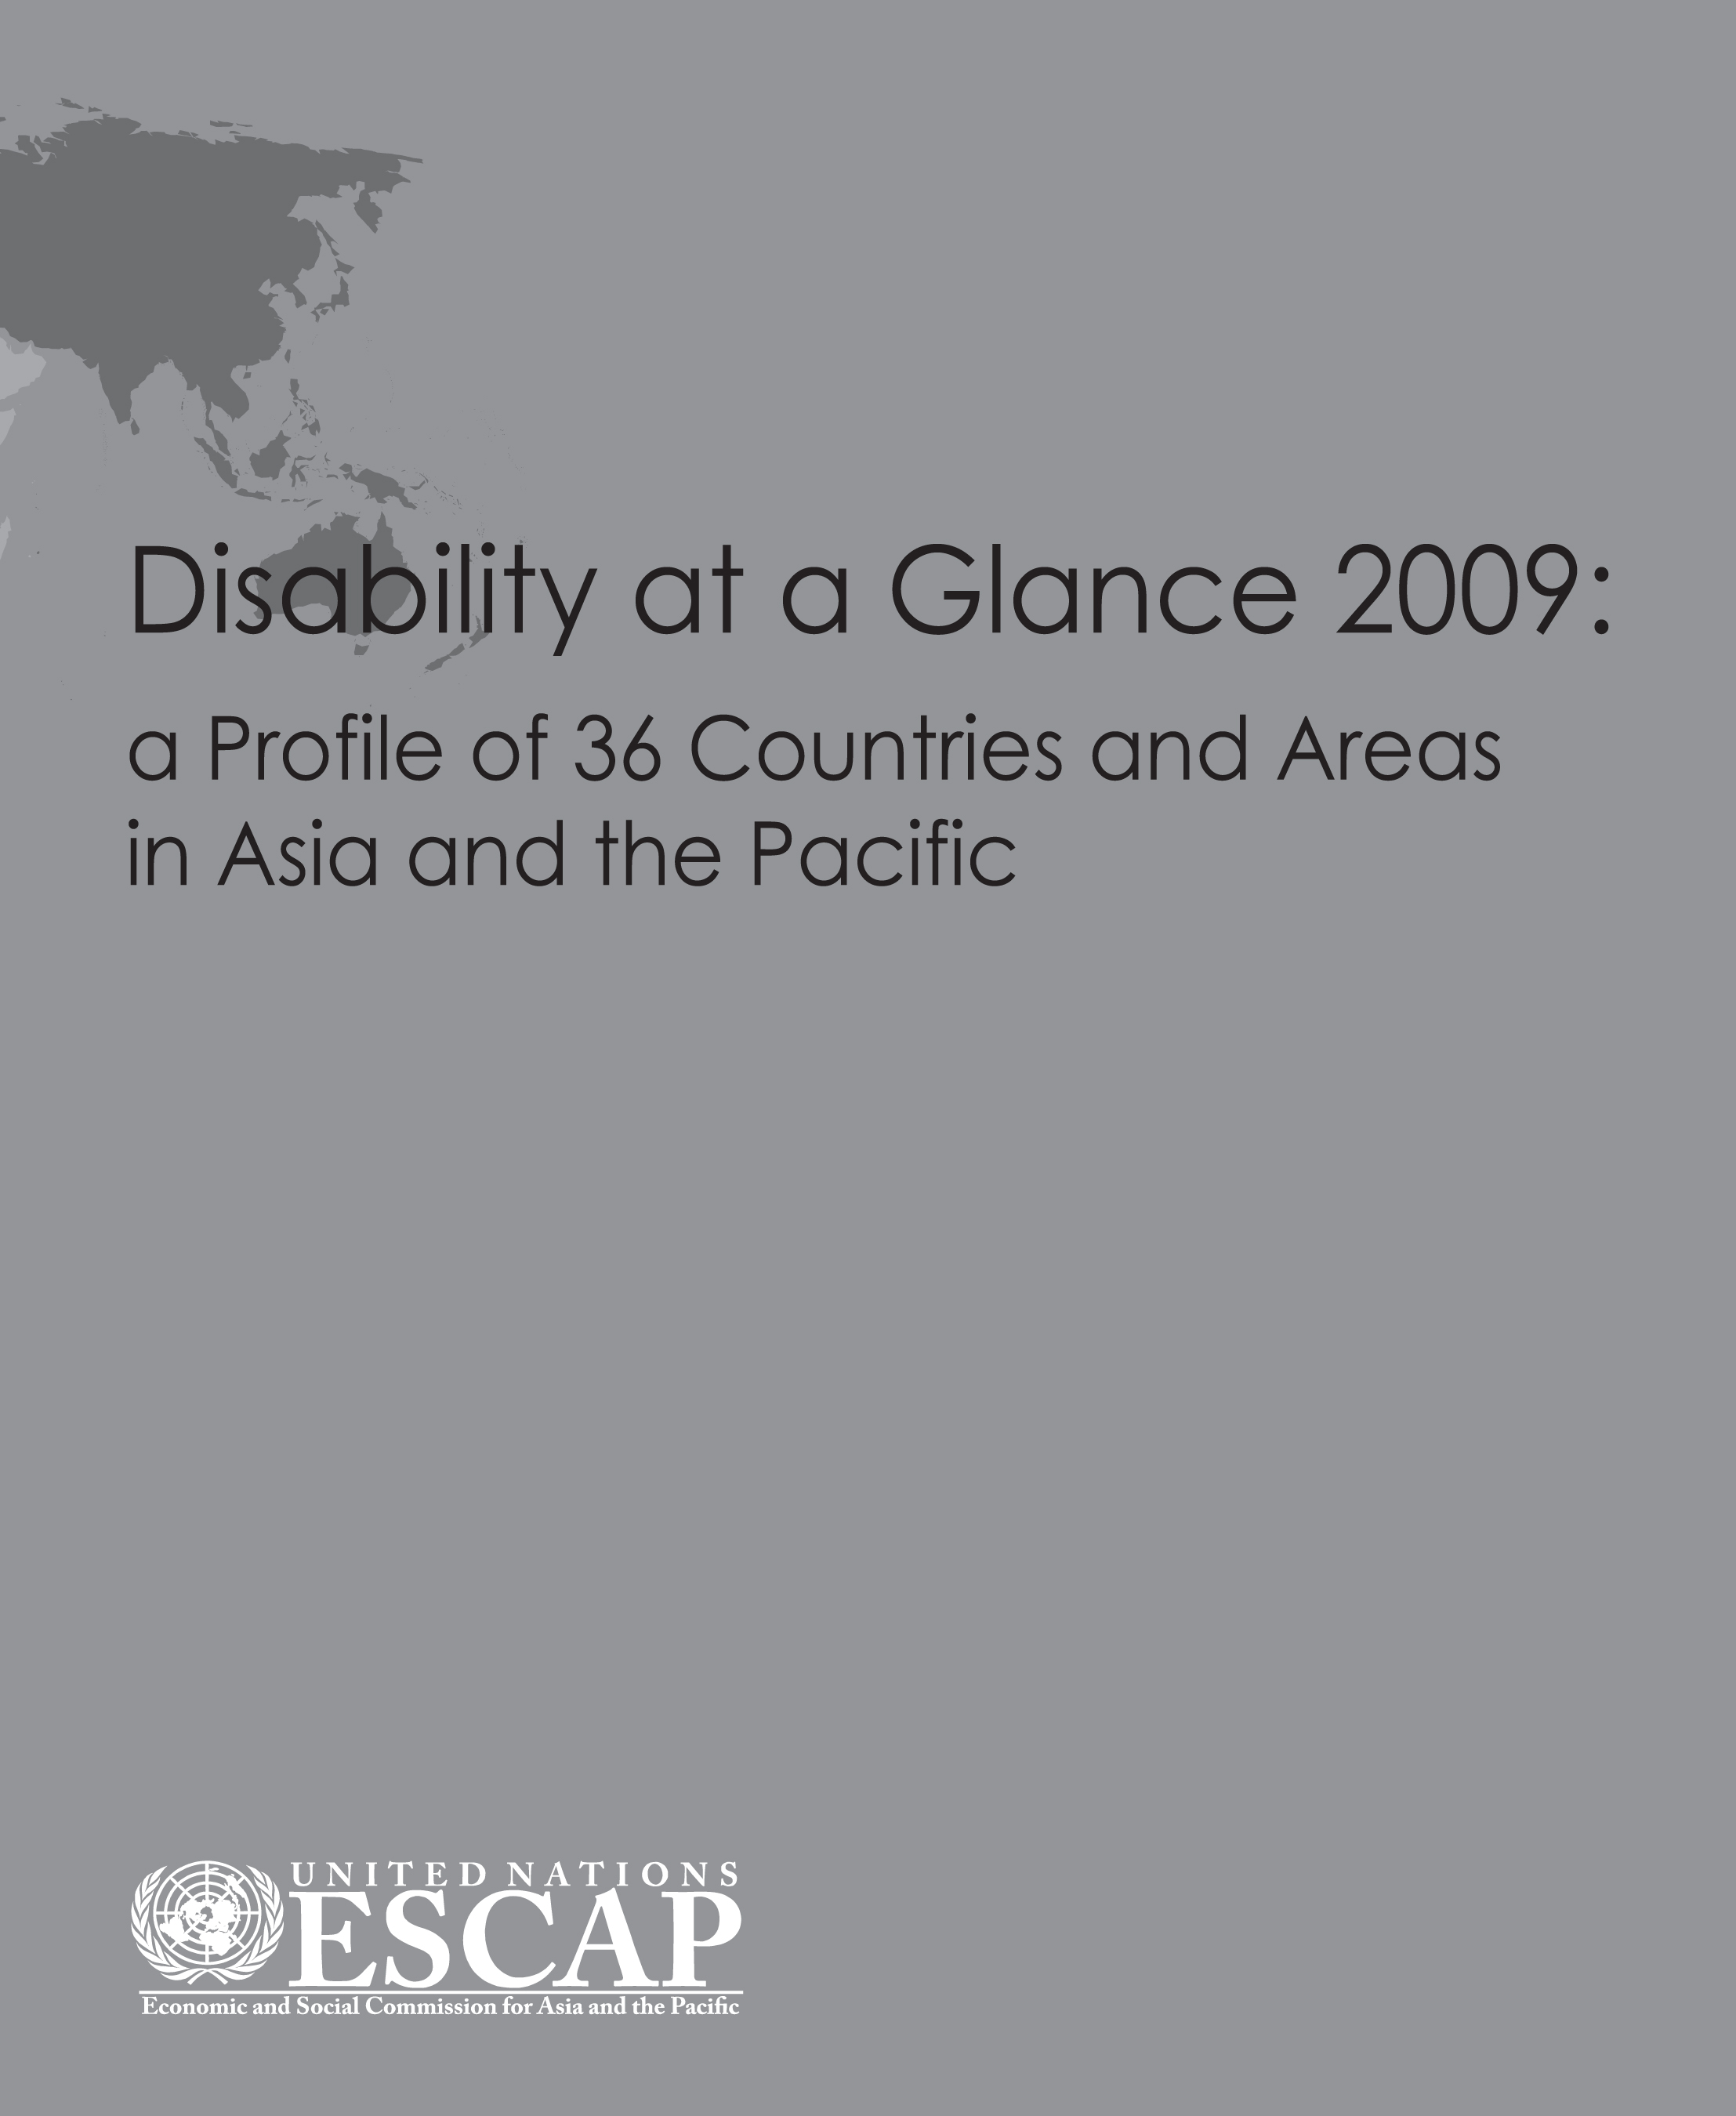 image of Disability at a Glance 2009